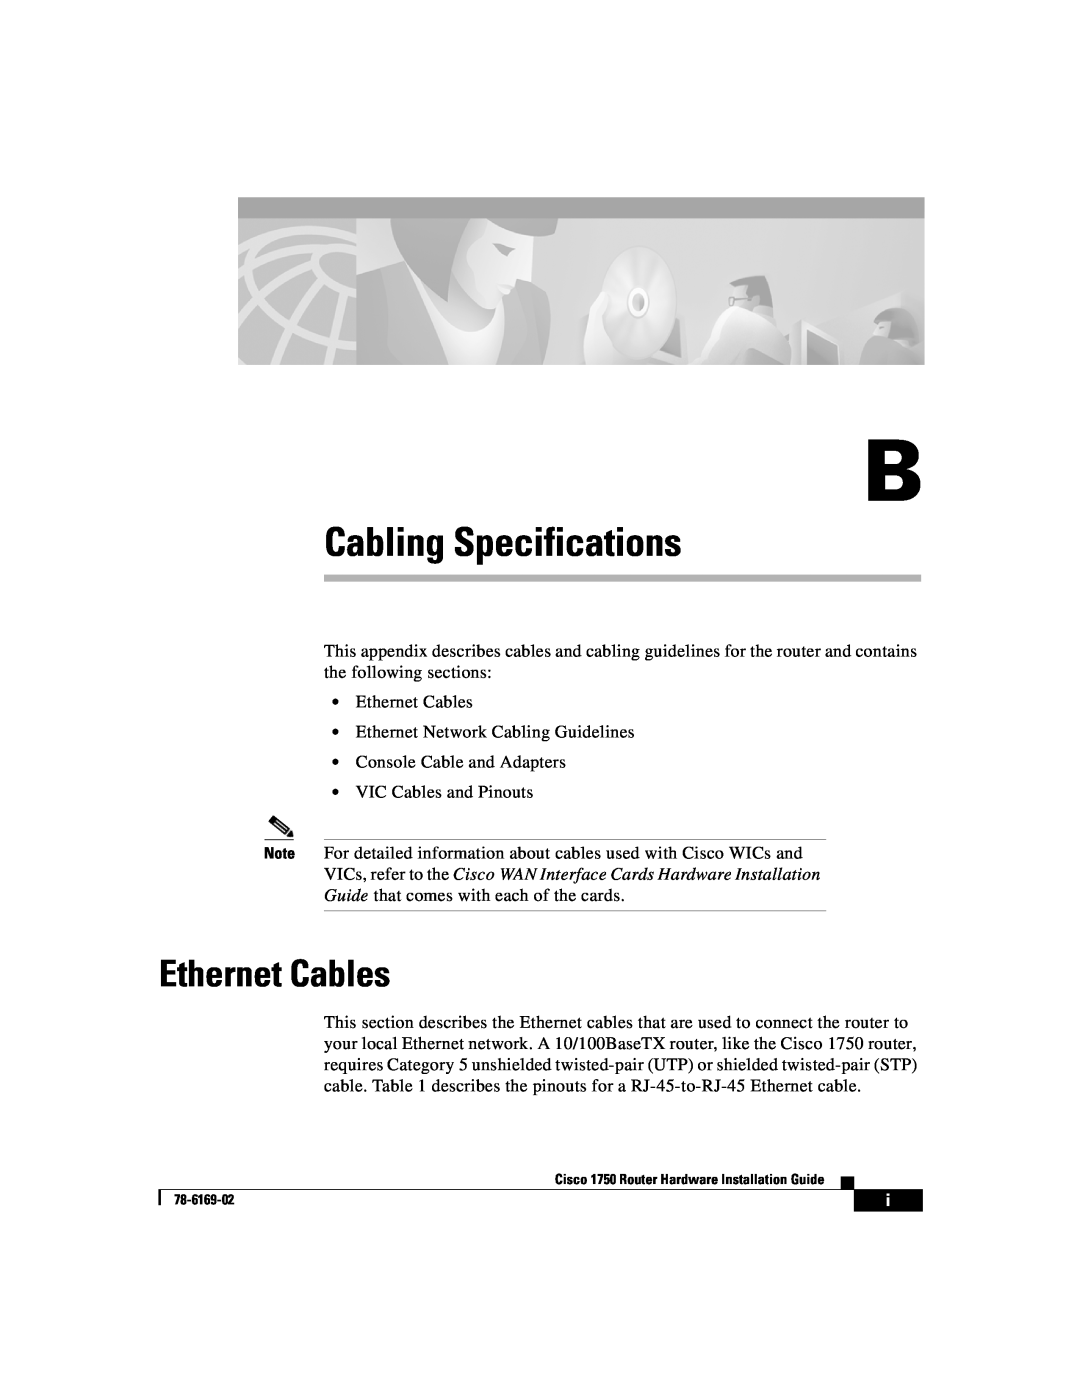 Cisco Systems CISCO1750 manual Cabling Specifications, Ethernet Cables 